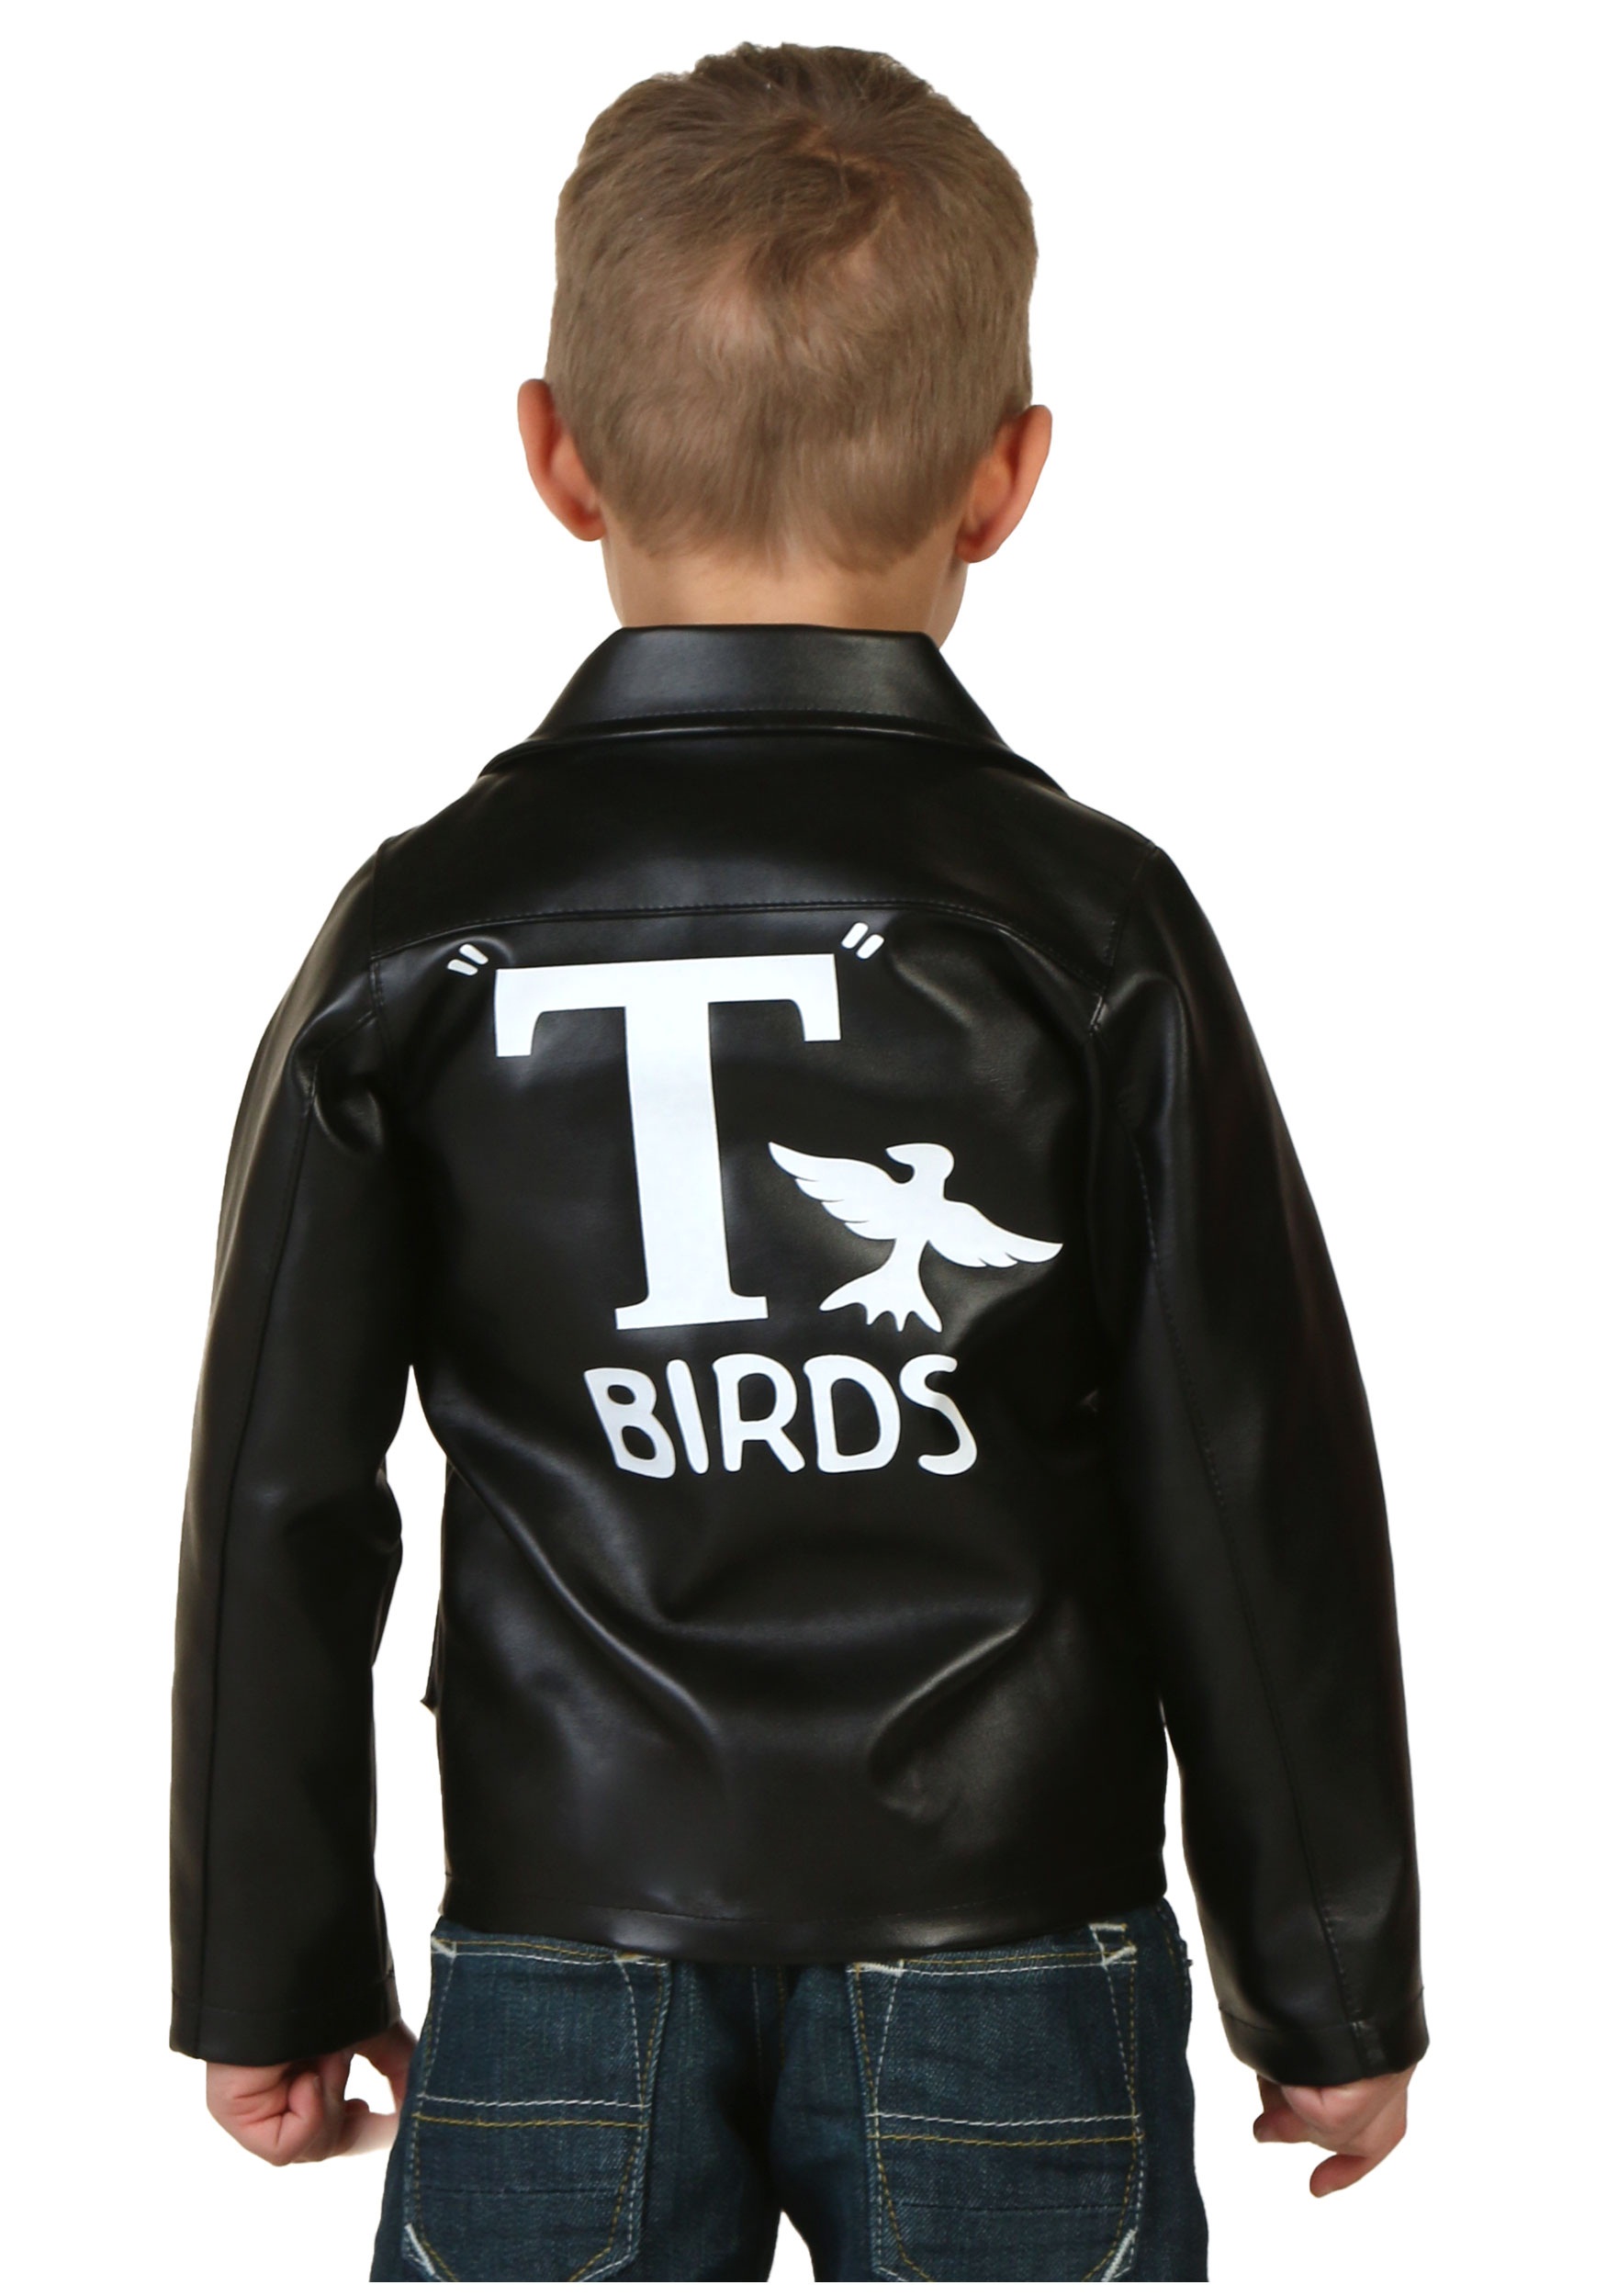 Toddler Grease T-Birds Jacket Costume , Officially Licensed Costume